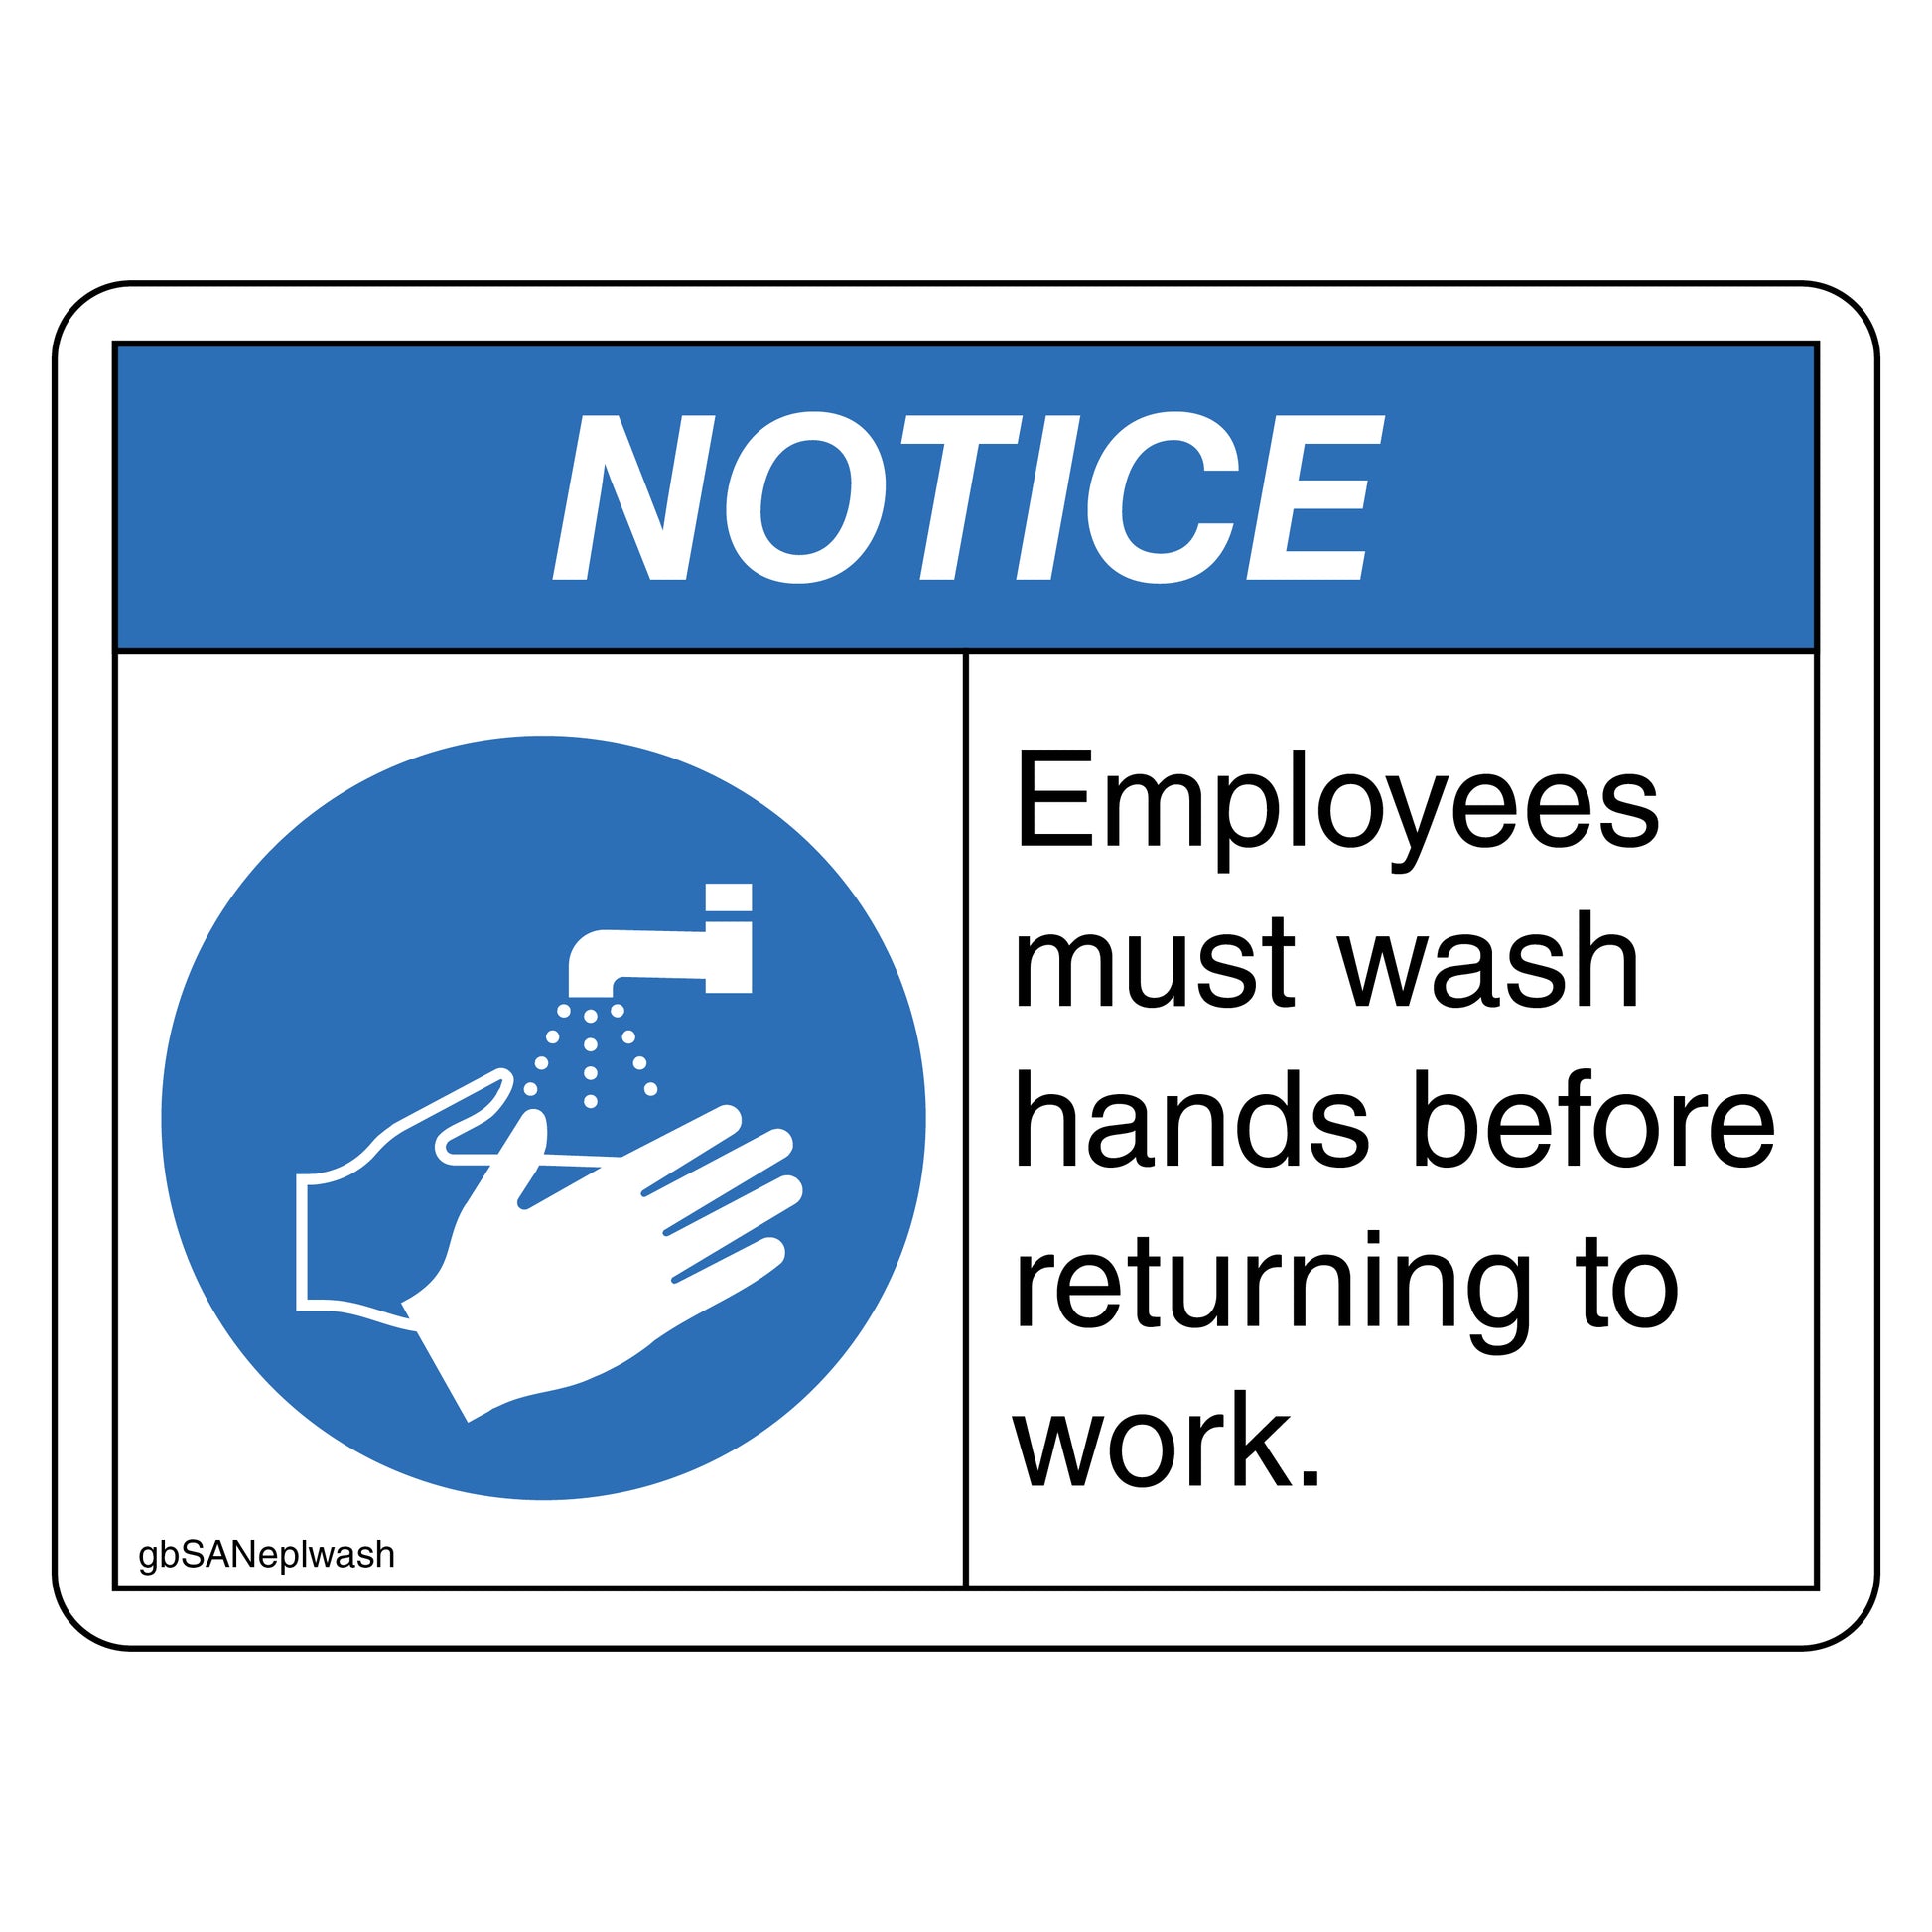 Notice, employees must wash hands before returning to work decal